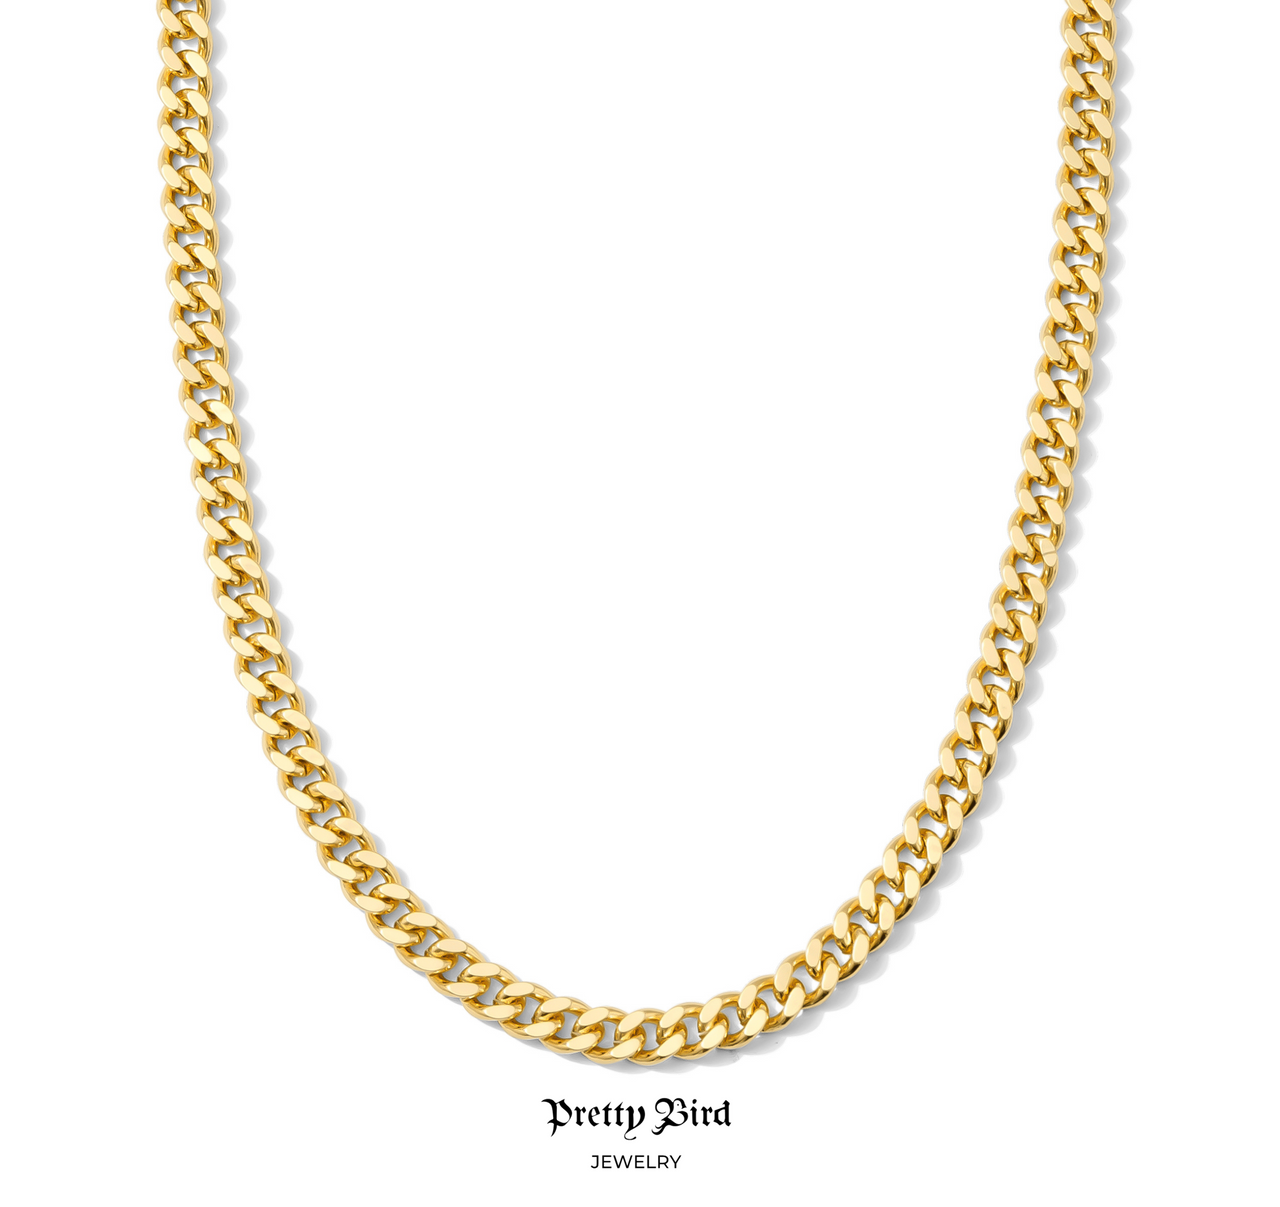 The Thick Cuban Chain Necklace